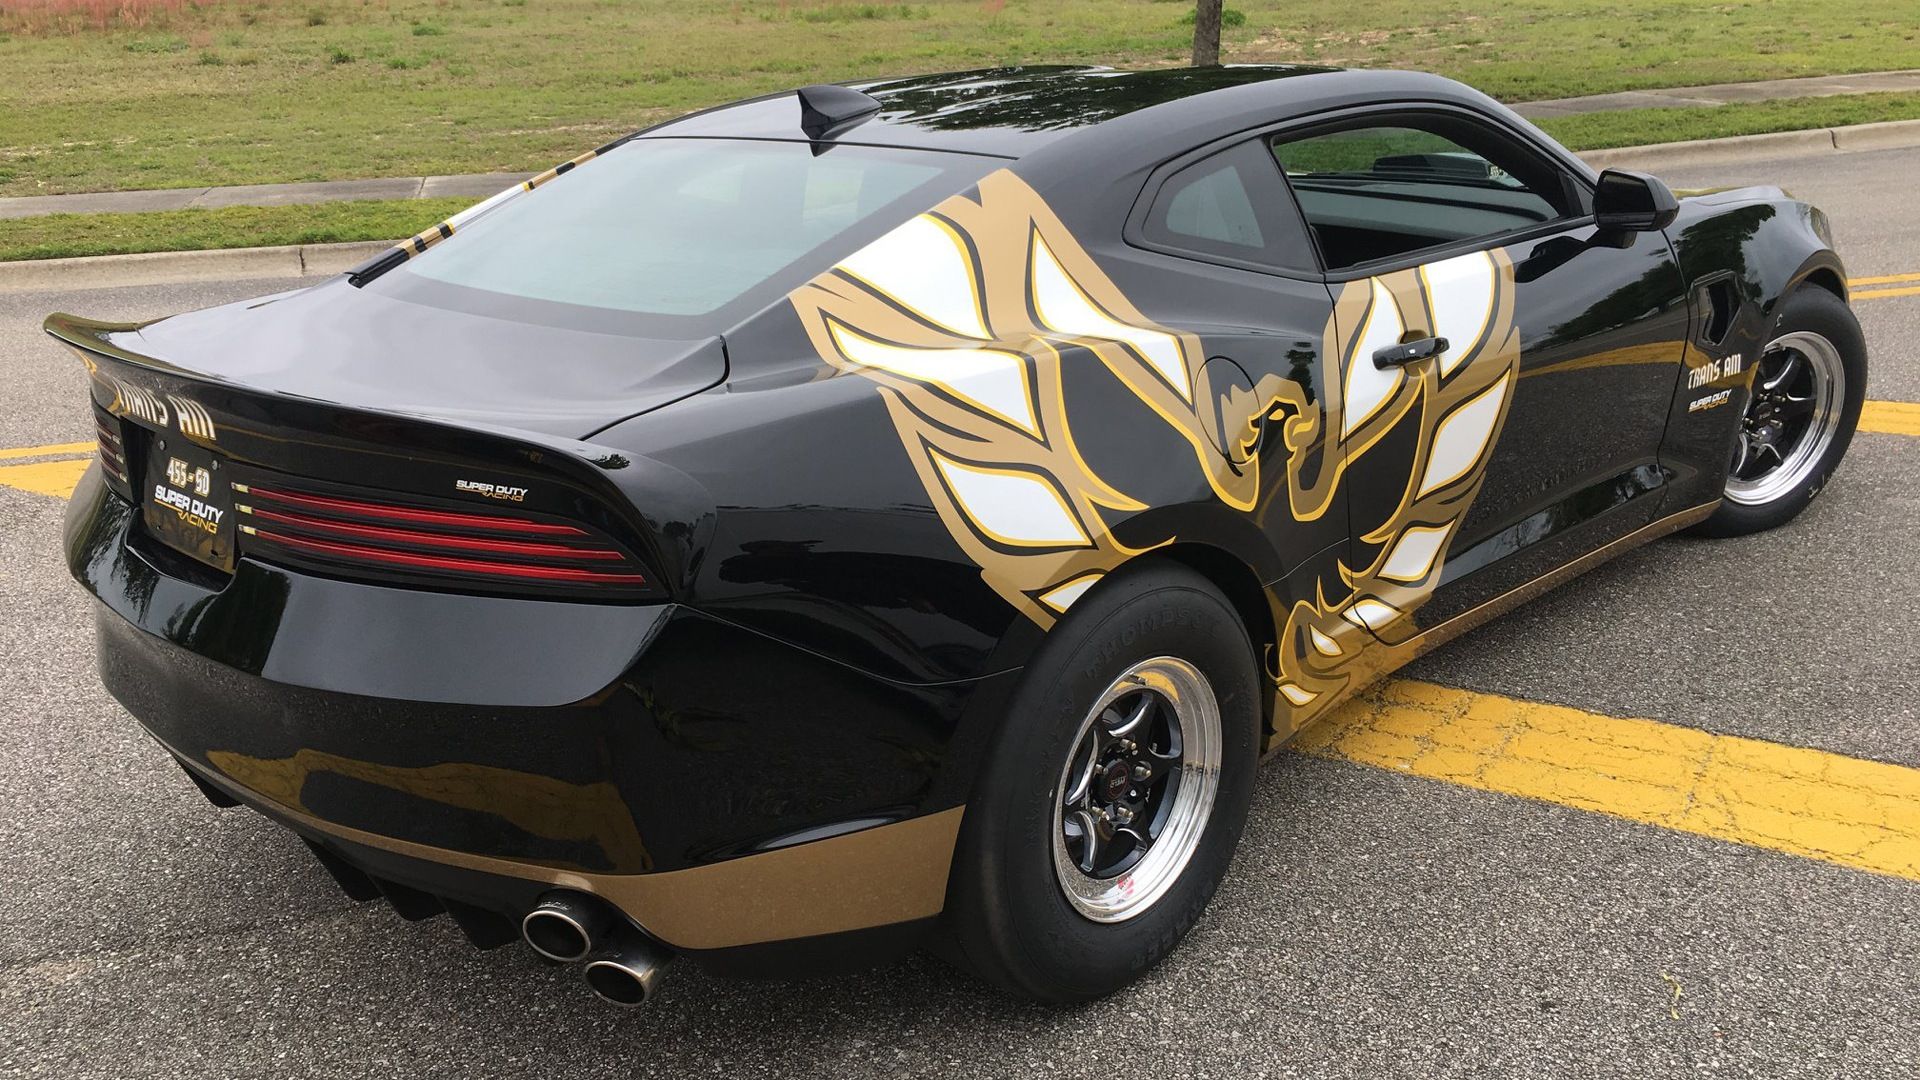 10 Things We Just Learned About The New 2021 Pontiac Trans Am Firebird